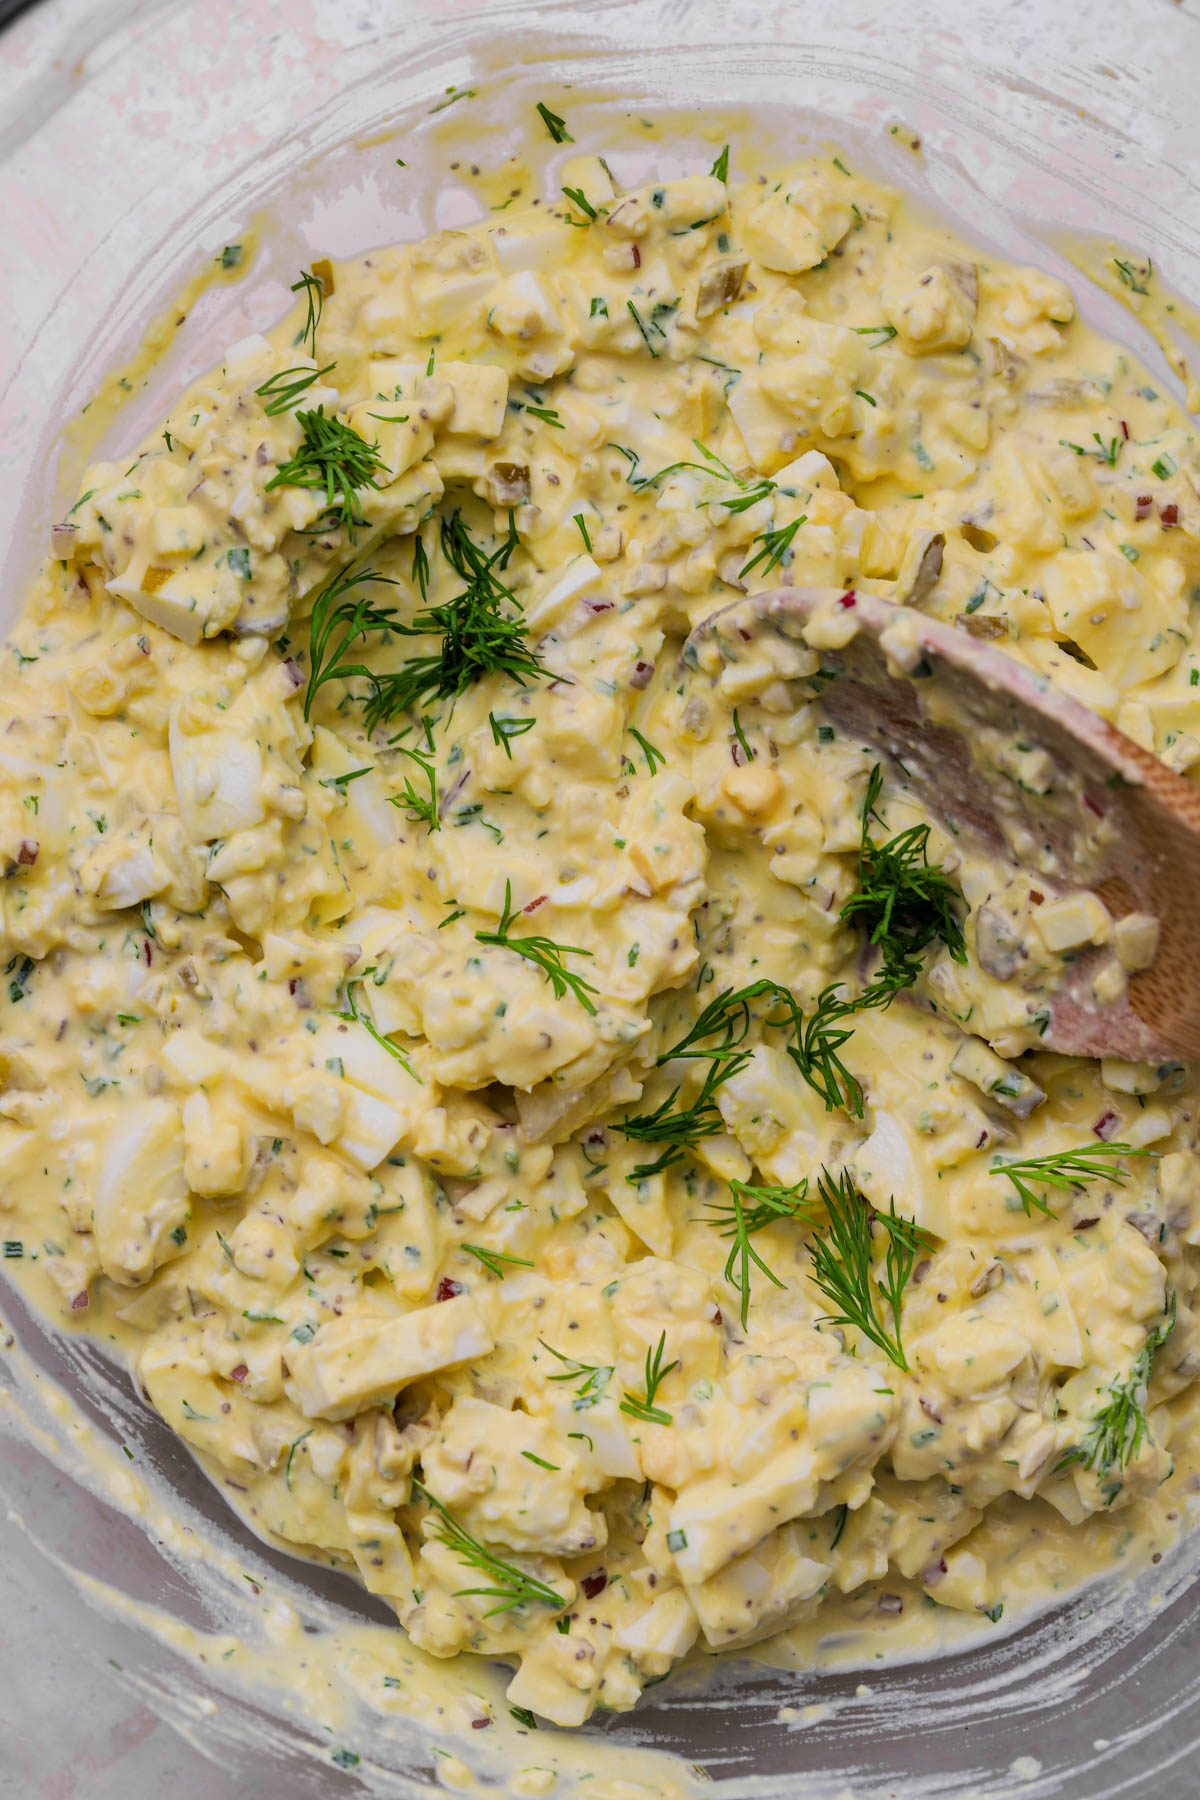 Creamy egg salad with dill pickles and fresh dill. 